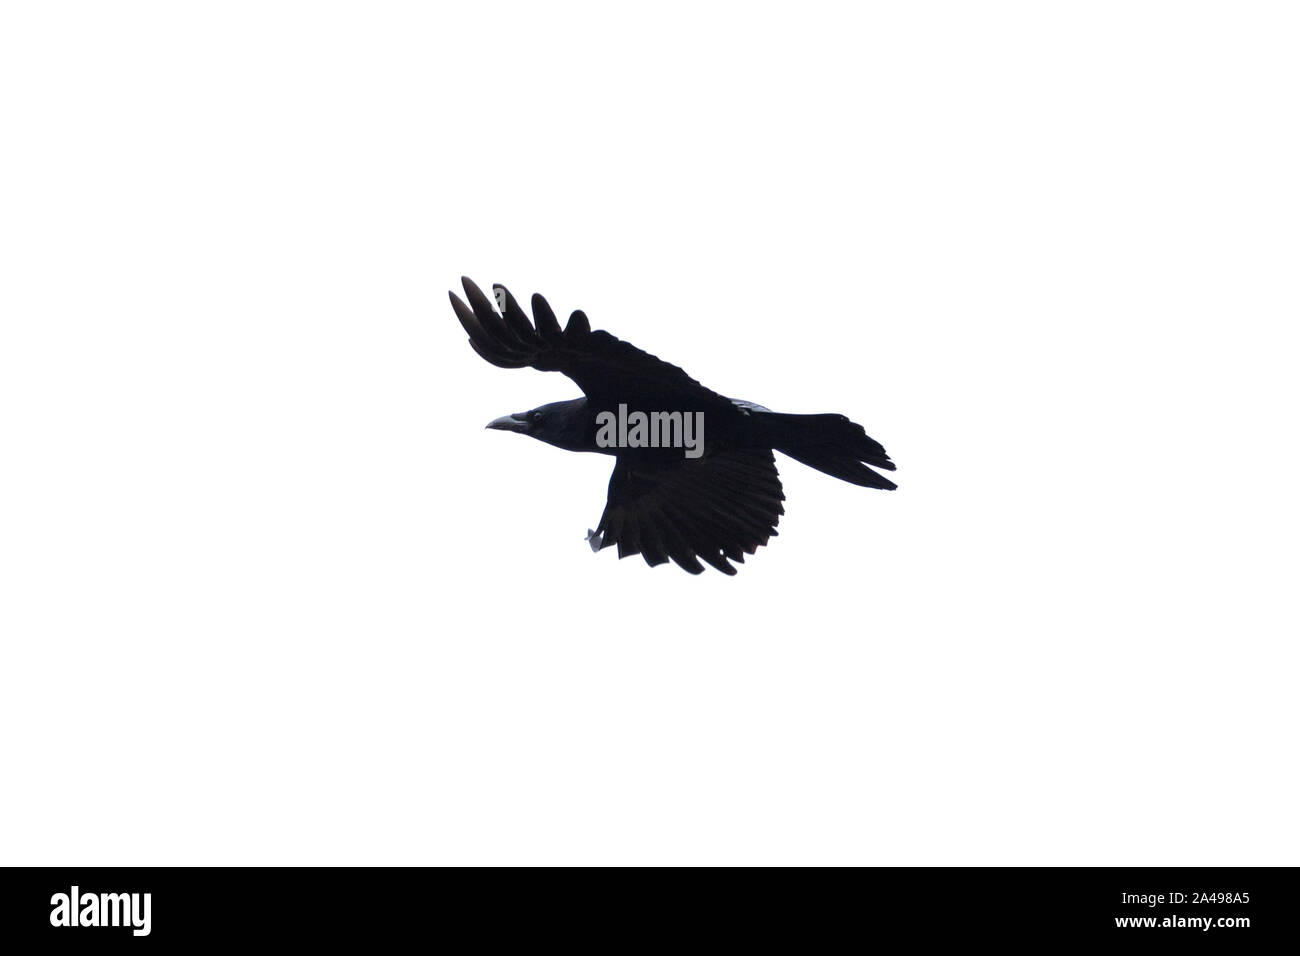 Raven Silhouette High Resolution Stock Photography and Images - Alamy